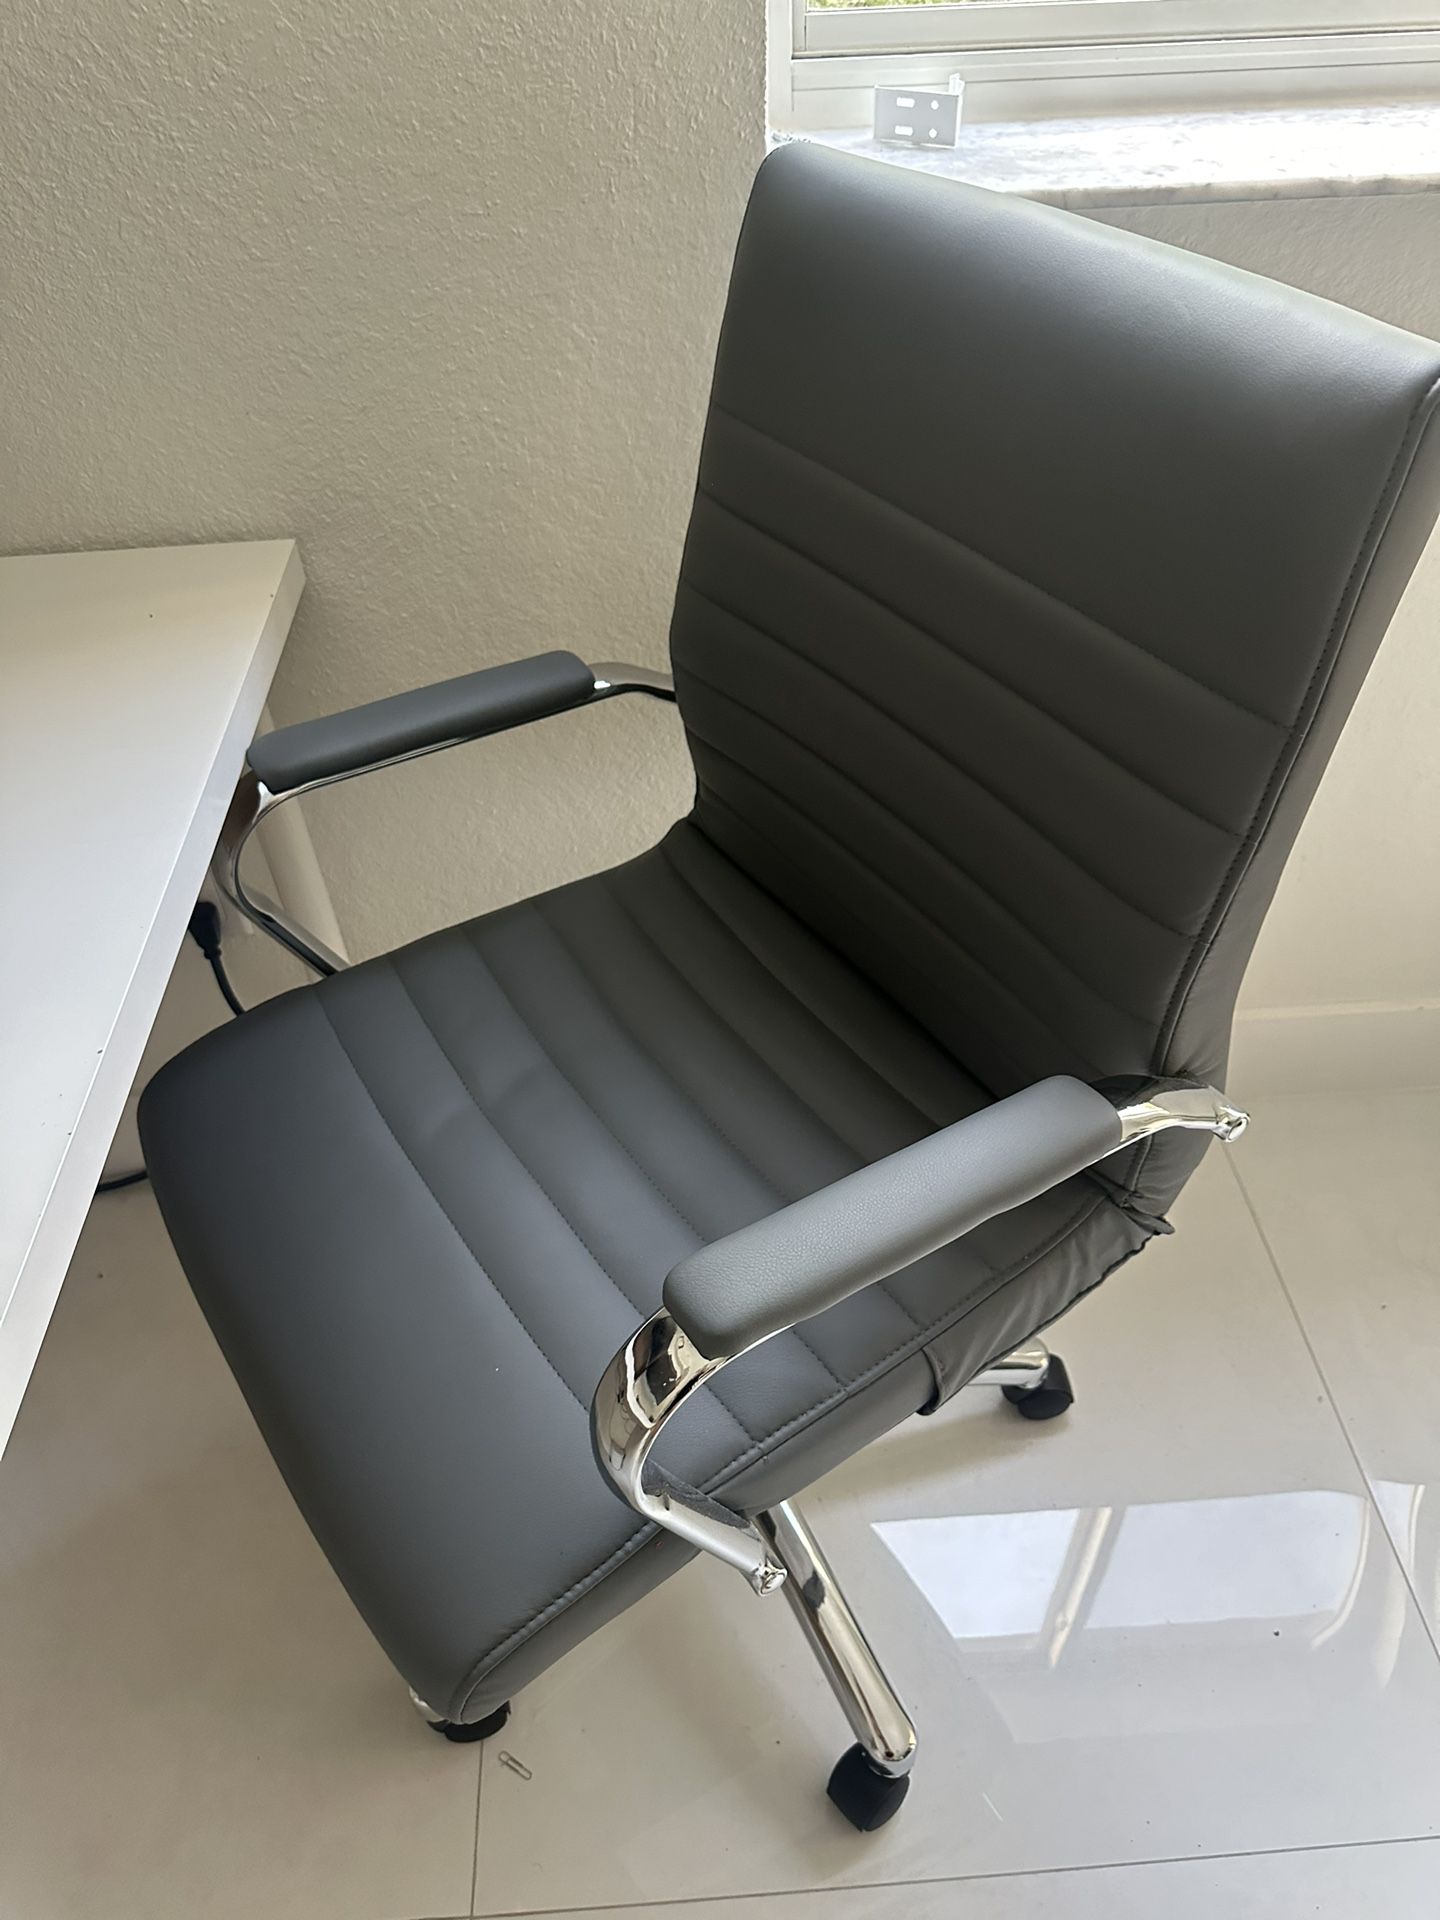 Grey Office Chair 